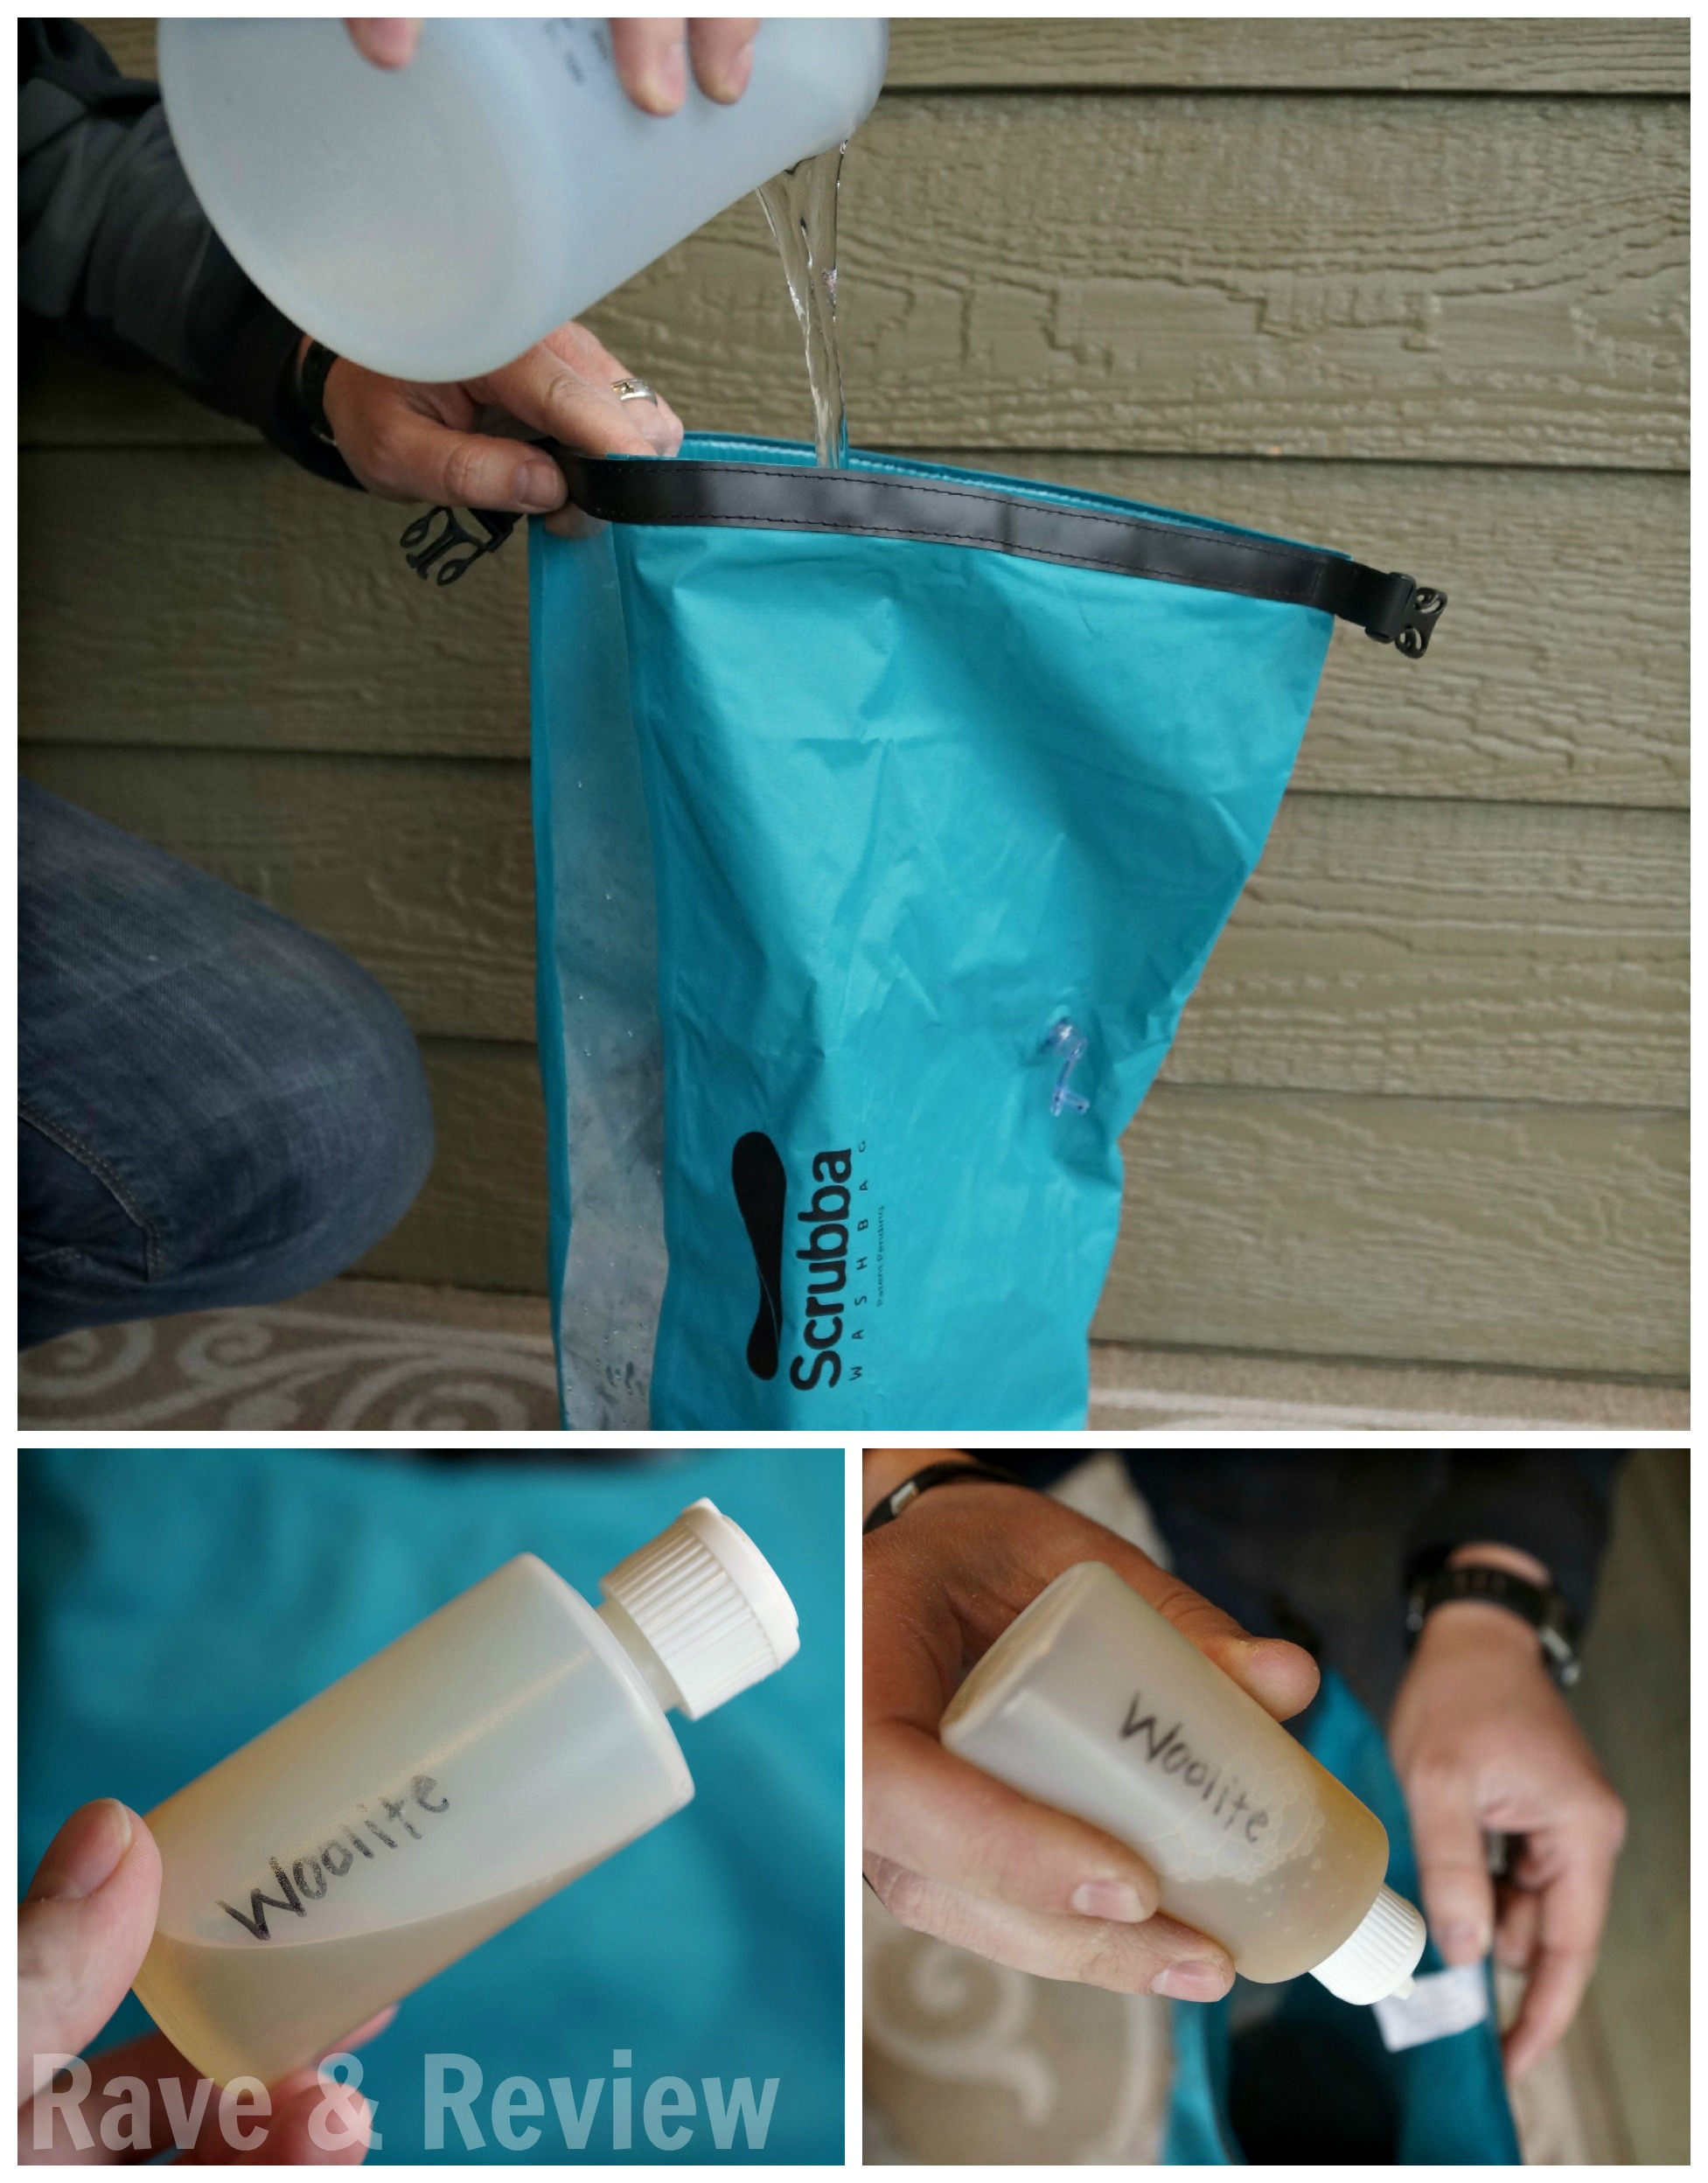 Travel must-have: The Scrubba Wash Bag - Rave & Review